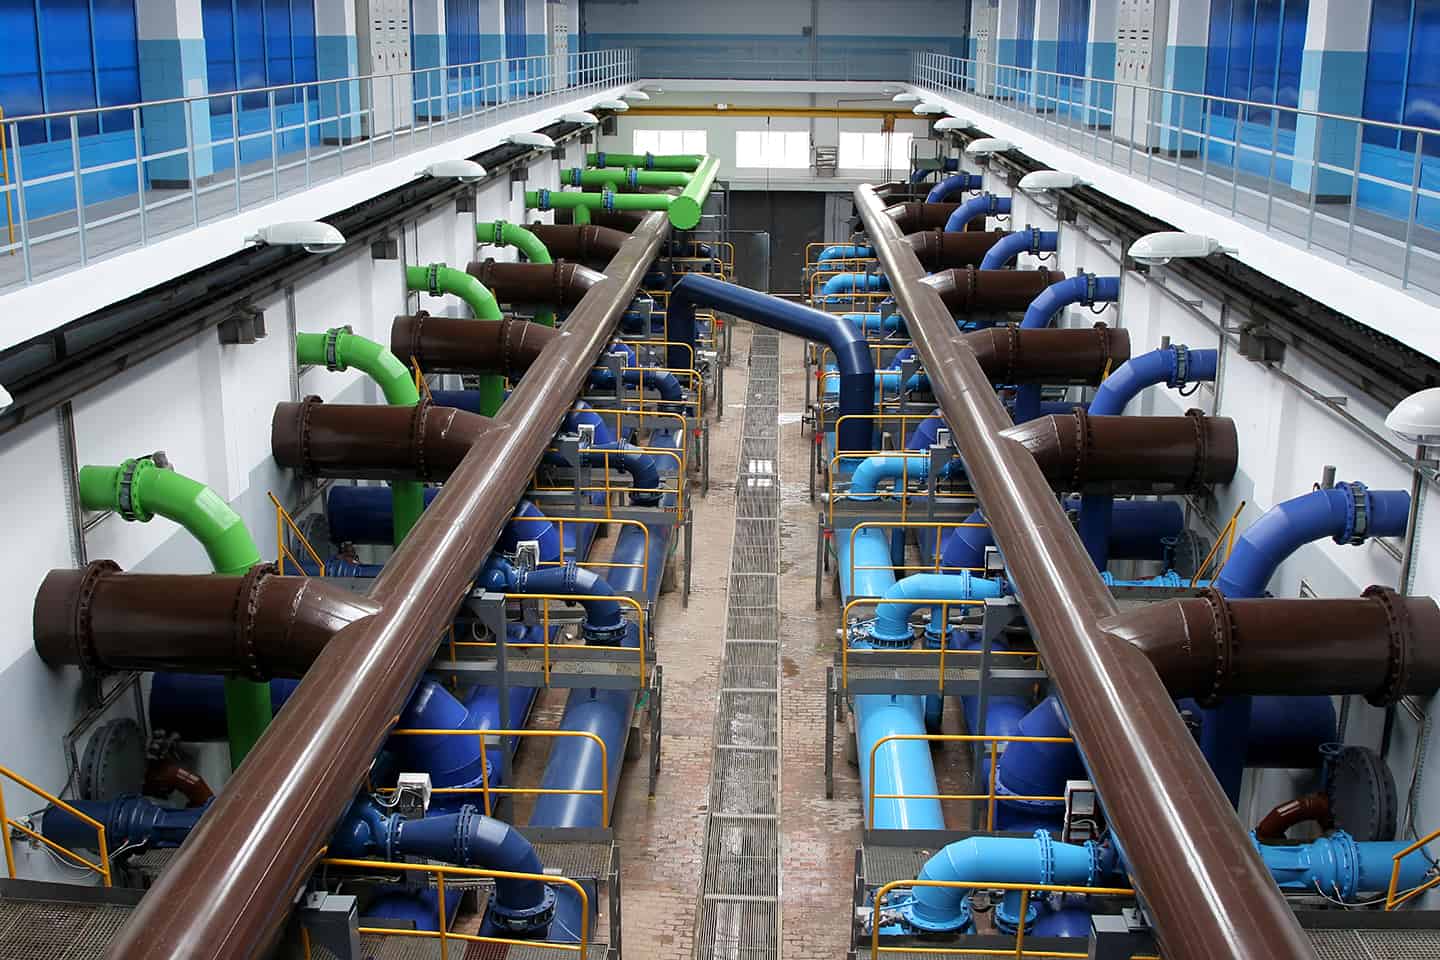 A water treatment plant featuring blue and green pipes made of SpecLite3® FRP.